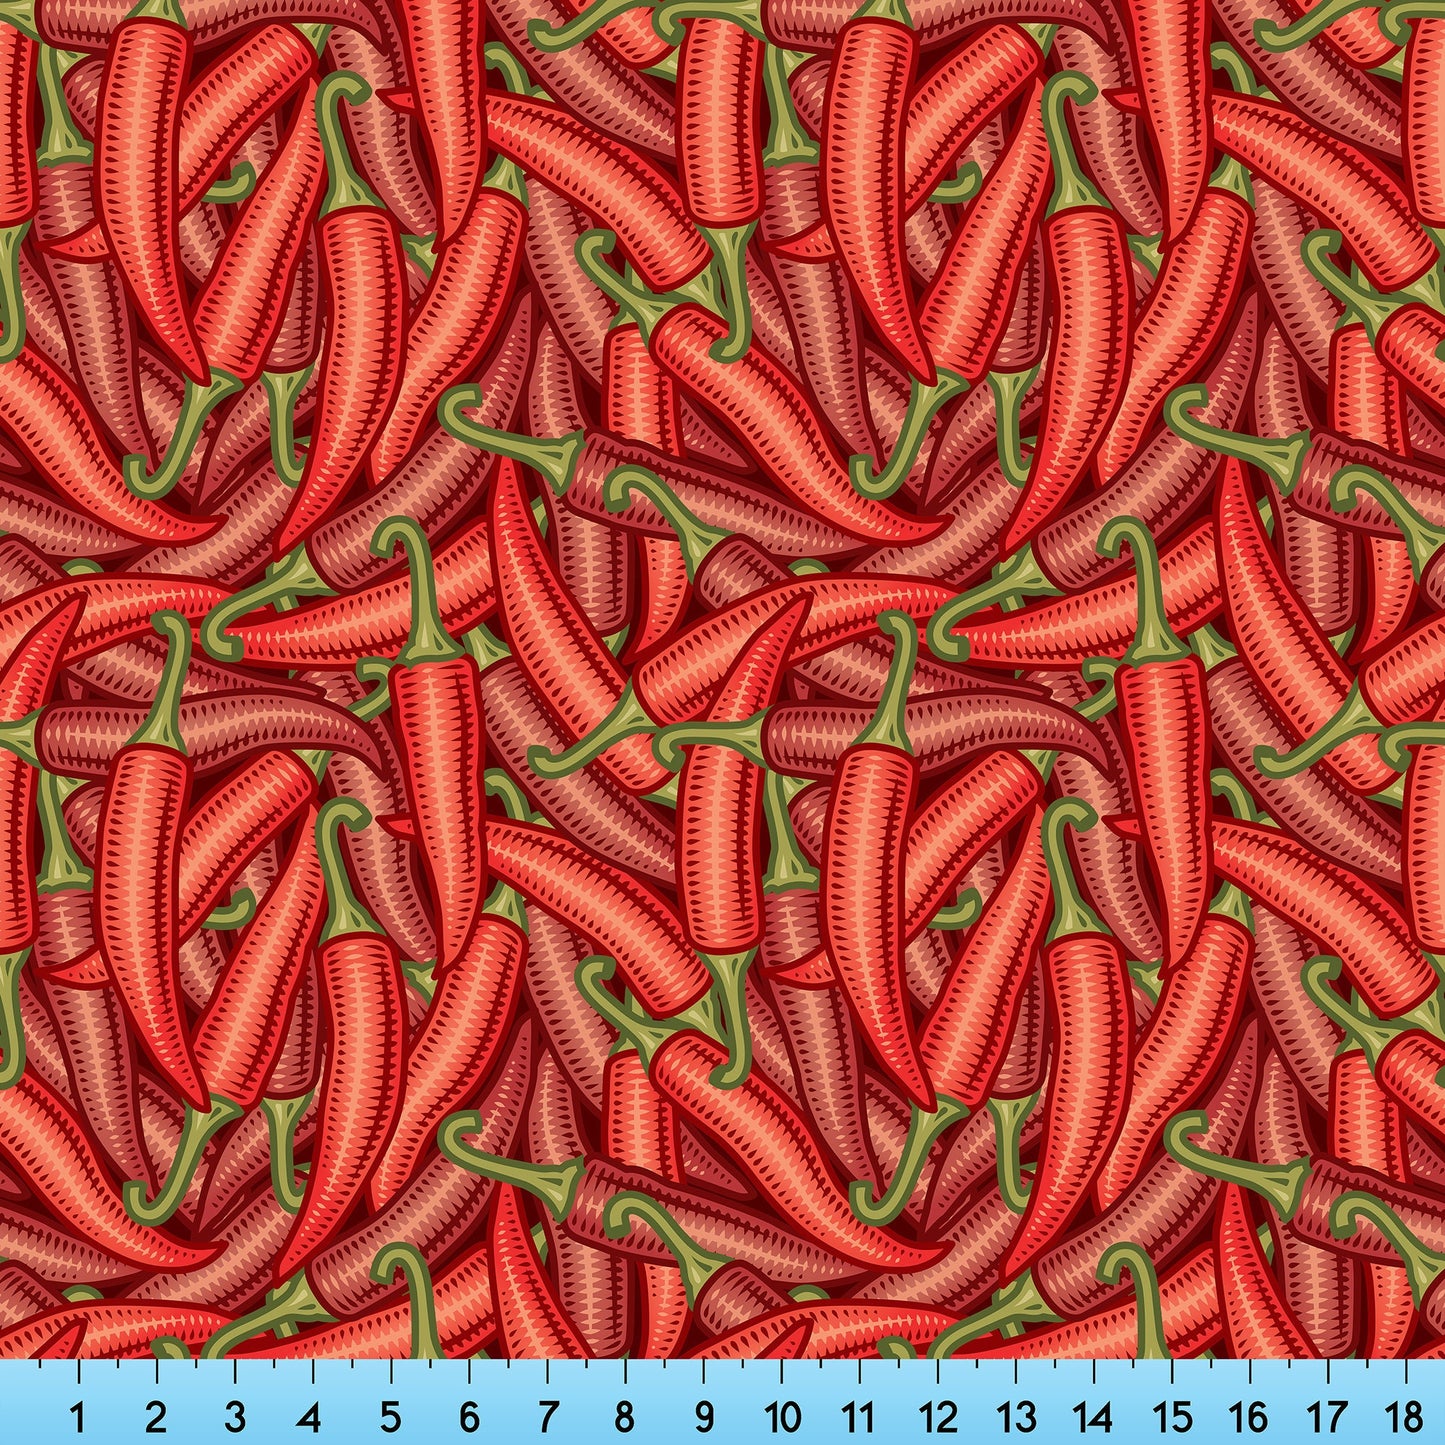 Hot Chili Peppers Fabric Pattern Printed on choice of Fabric By the Yard, Half Yard and Fat Quarter. Red Pepper, Habanero Print Fabric